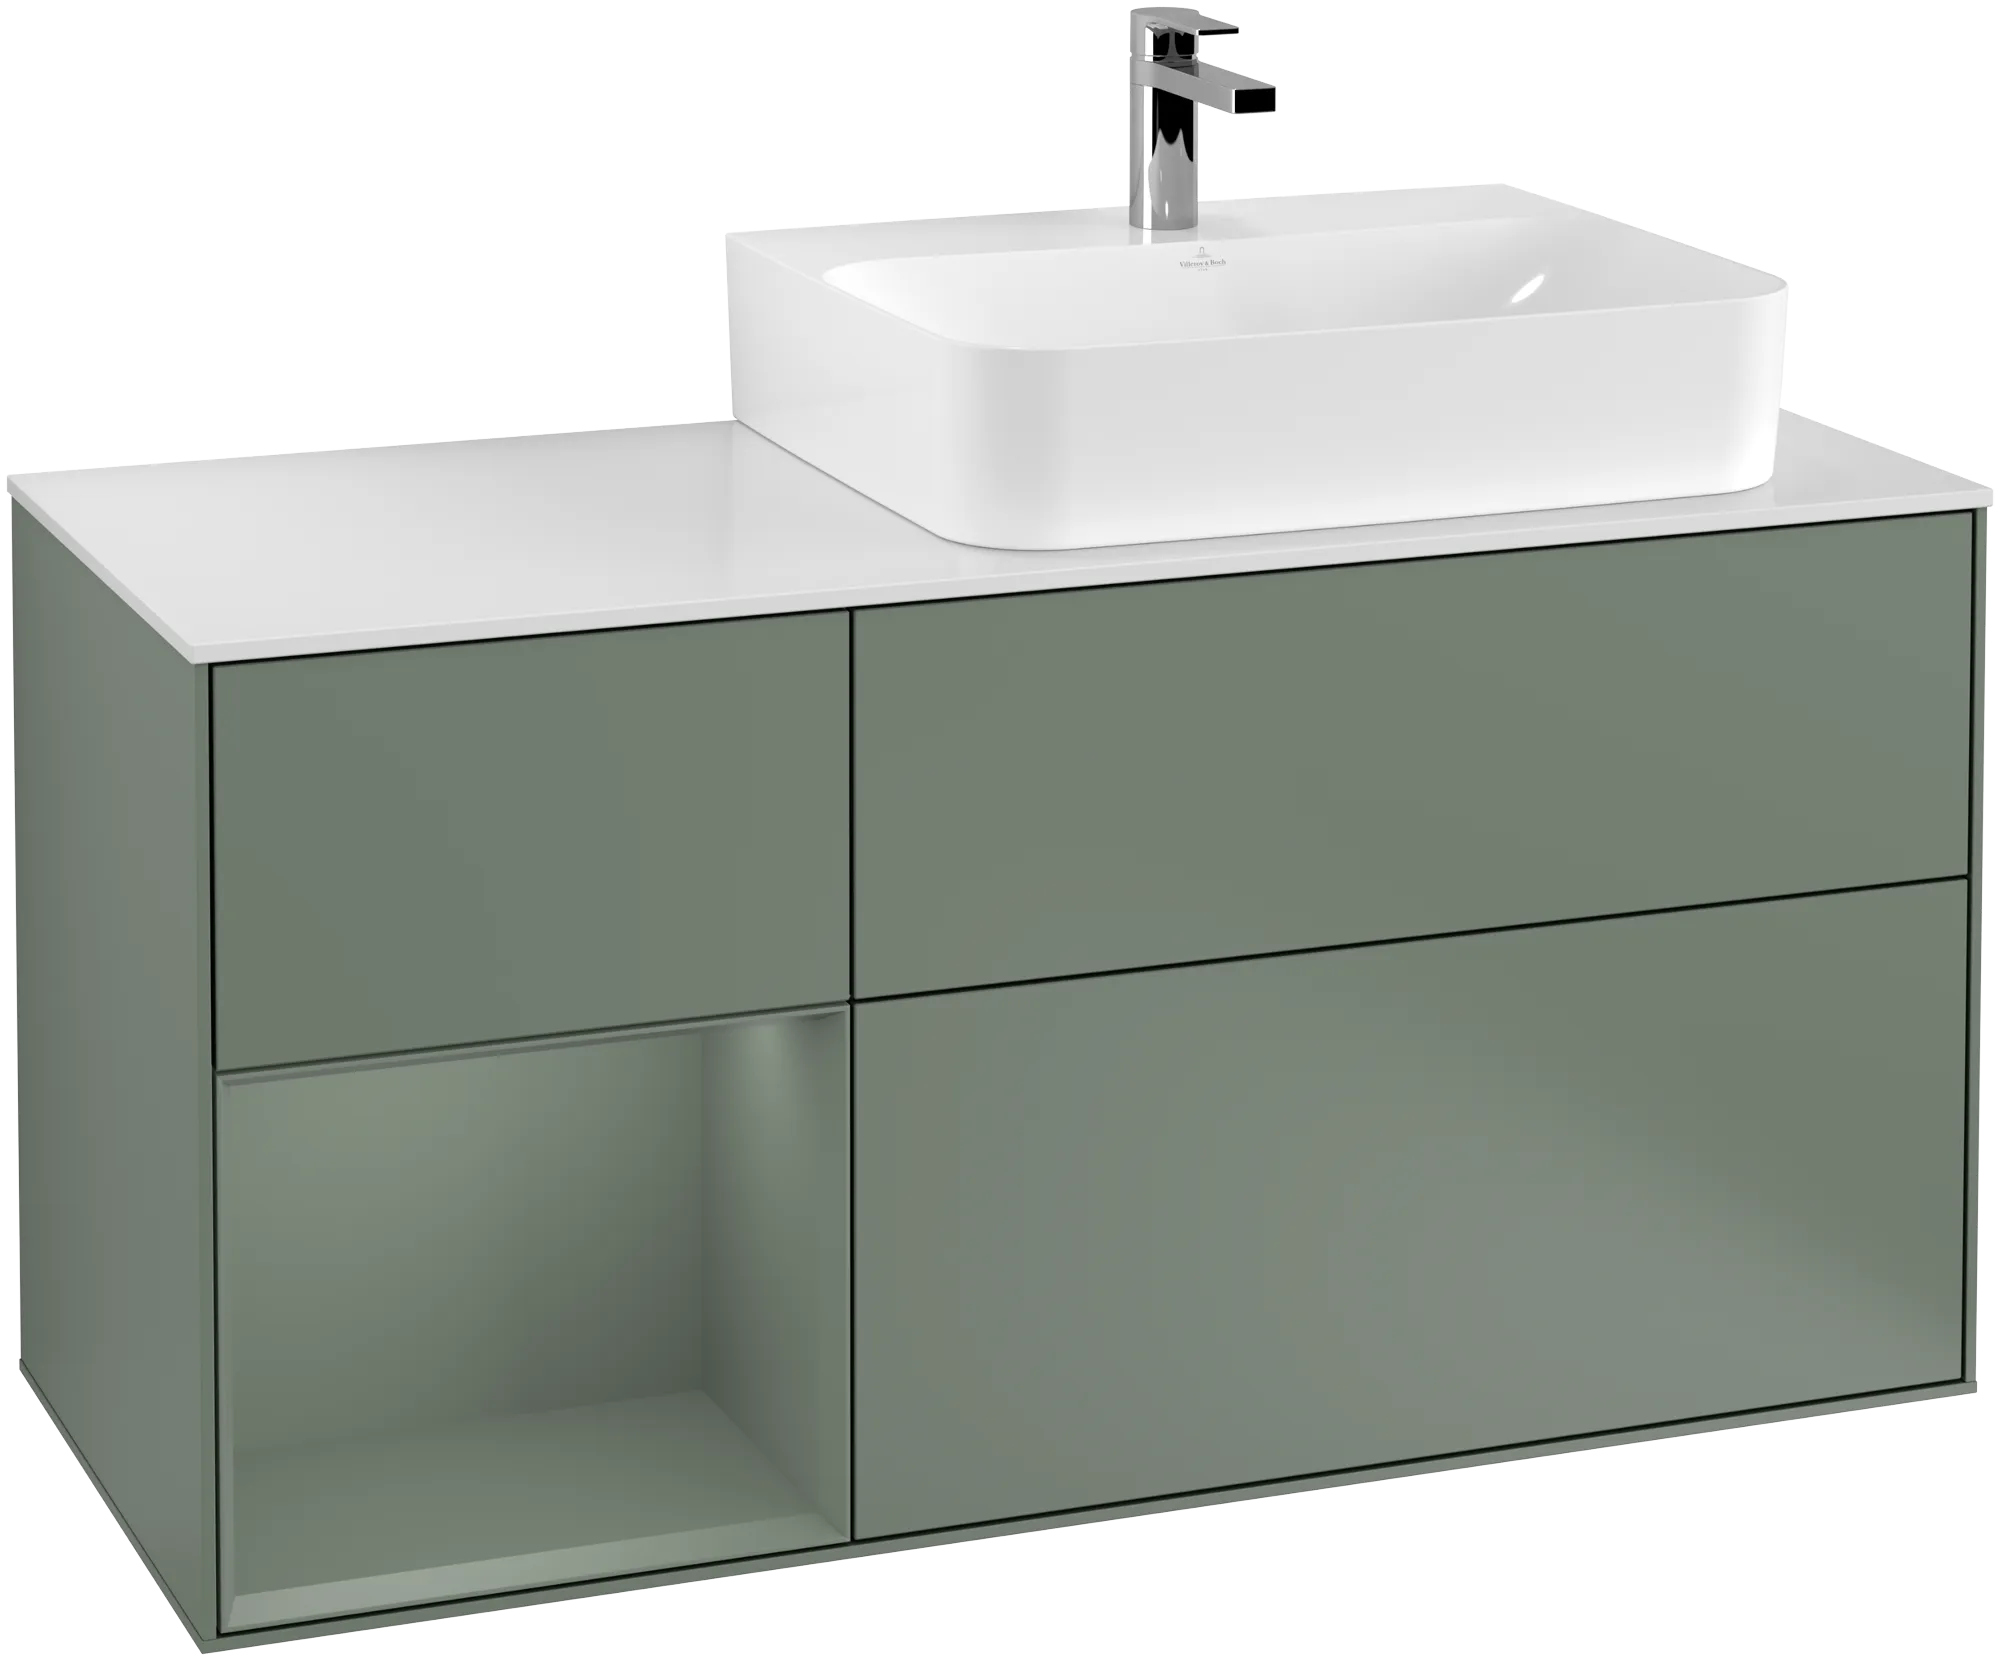 Picture of VILLEROY BOCH Finion Vanity unit, with lighting, 3 pull-out compartments, 1200 x 603 x 501 mm, Olive Matt Lacquer / Olive Matt Lacquer / Glass White Matt #G141GMGM